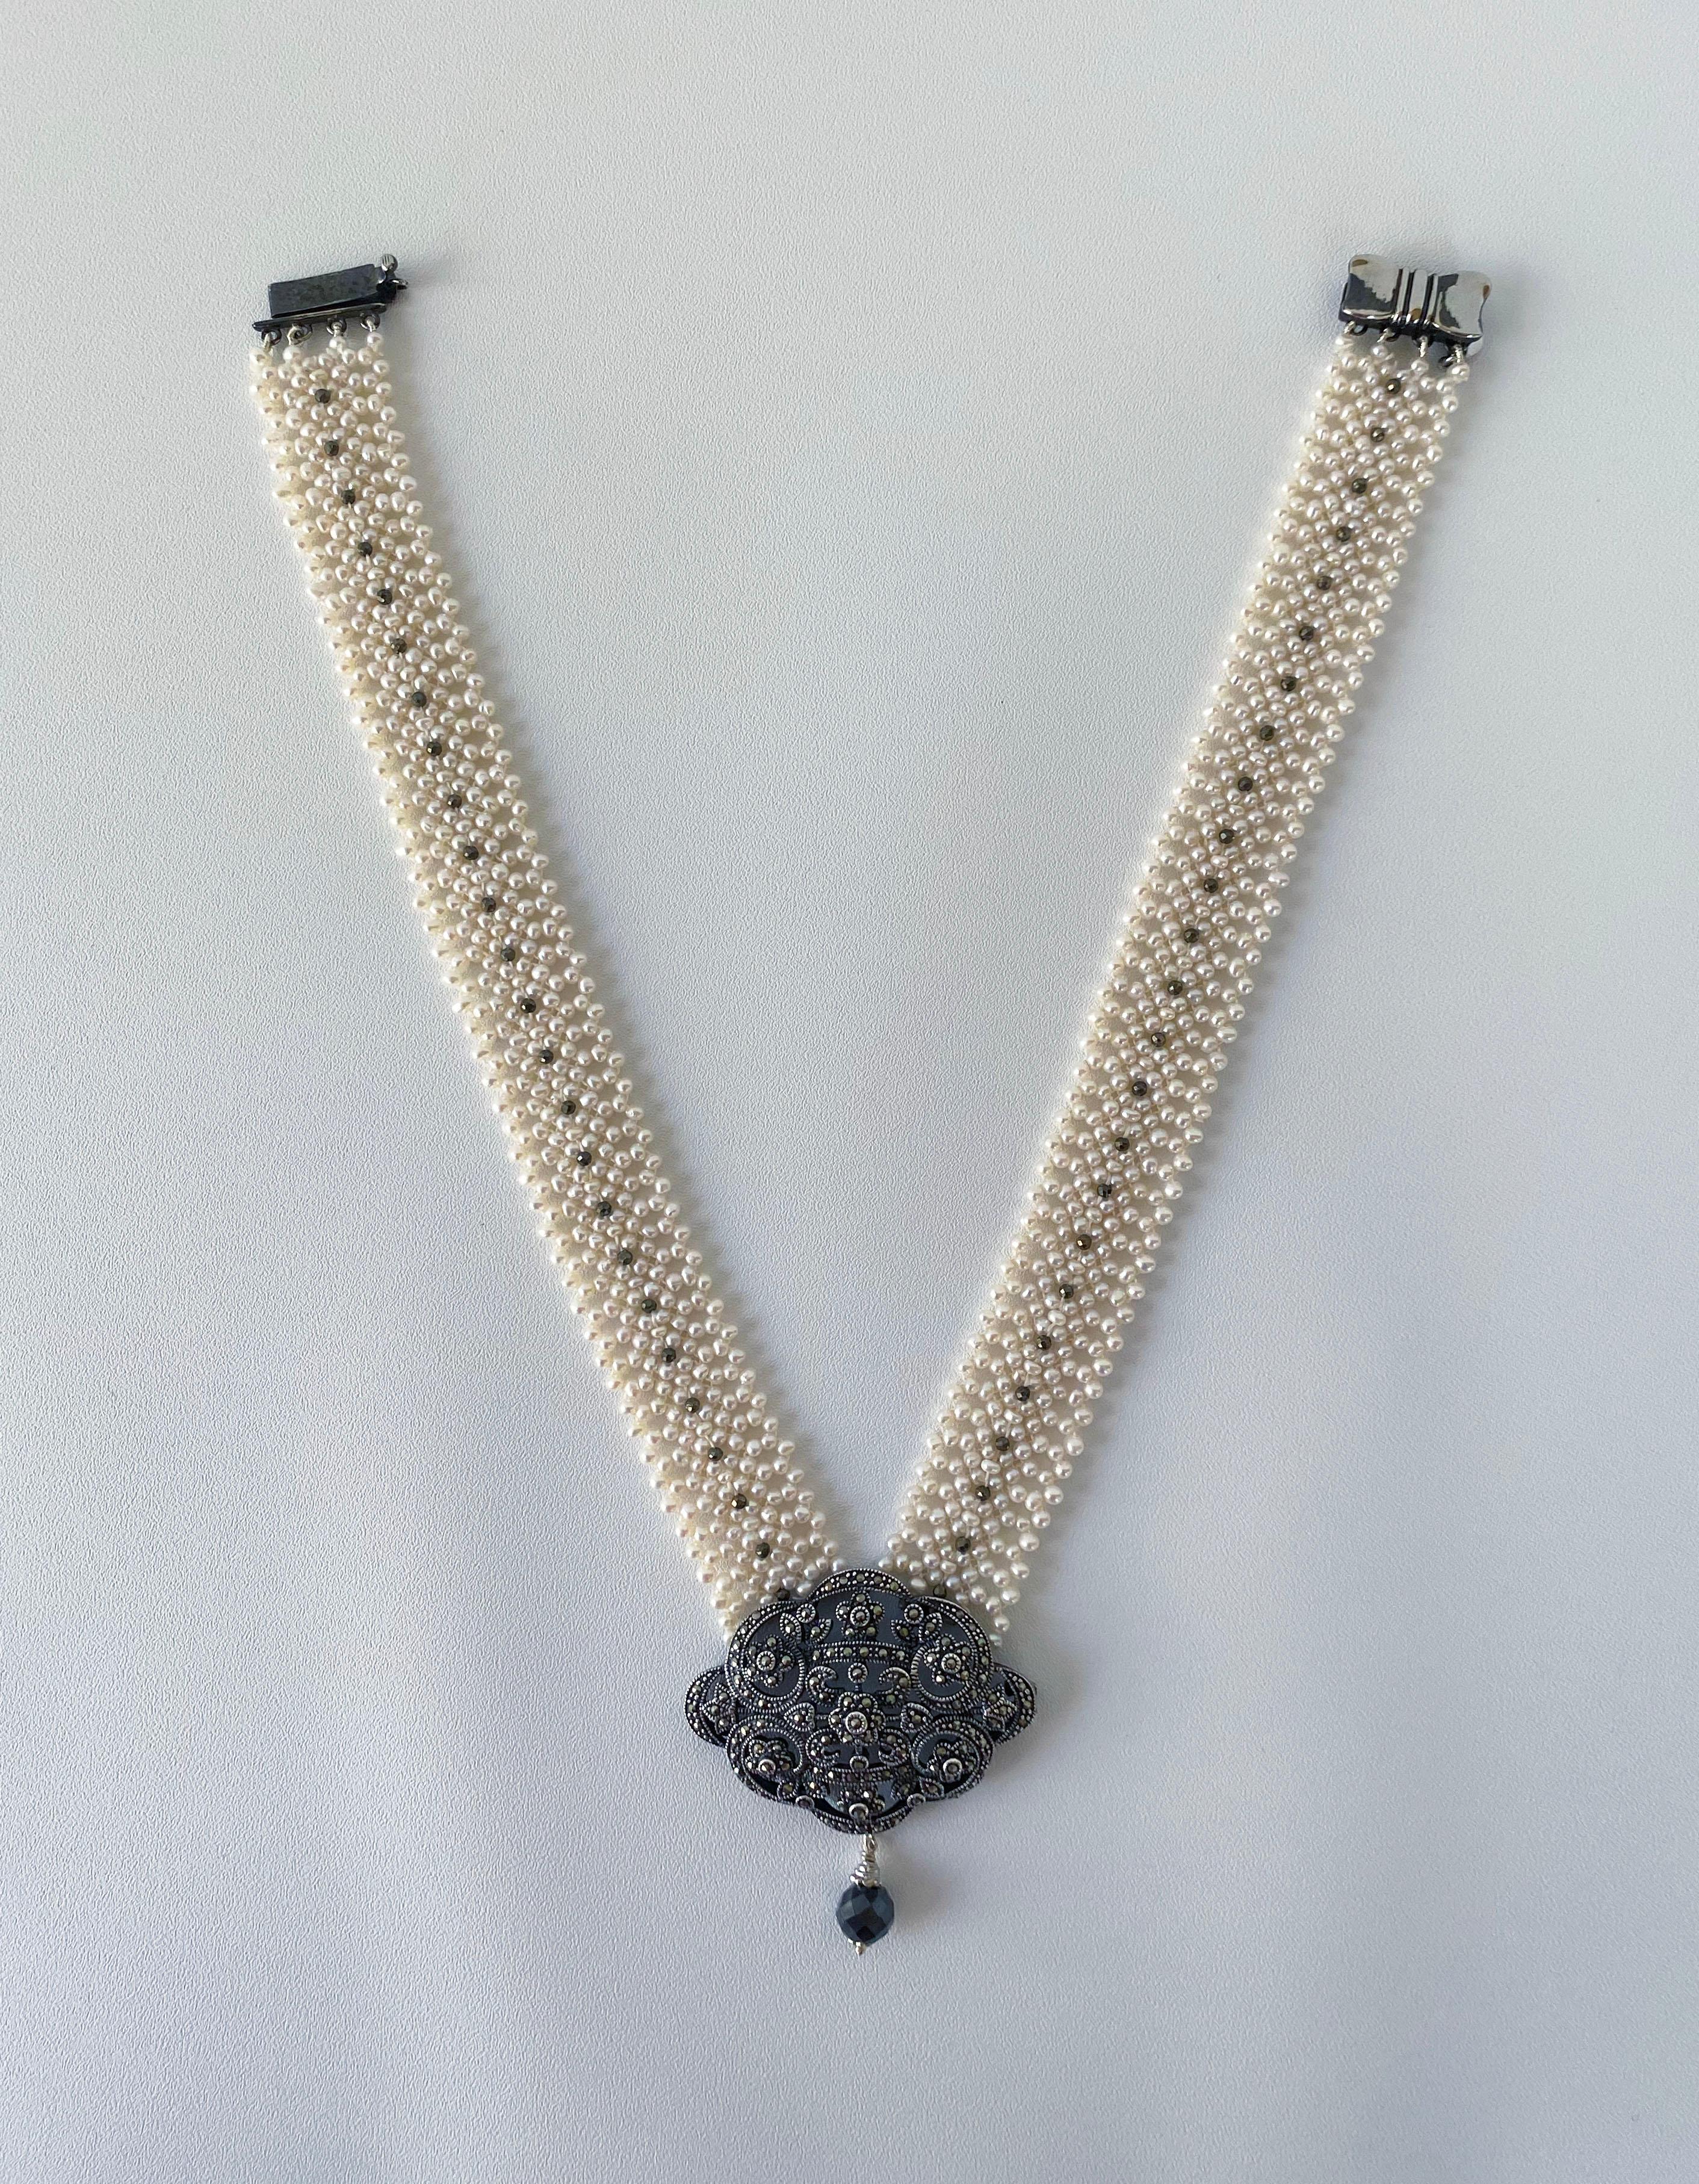 Artisan Marina J. Woven Pearl Necklace with Vintage Silver Centerpiece and Black Spinnel For Sale